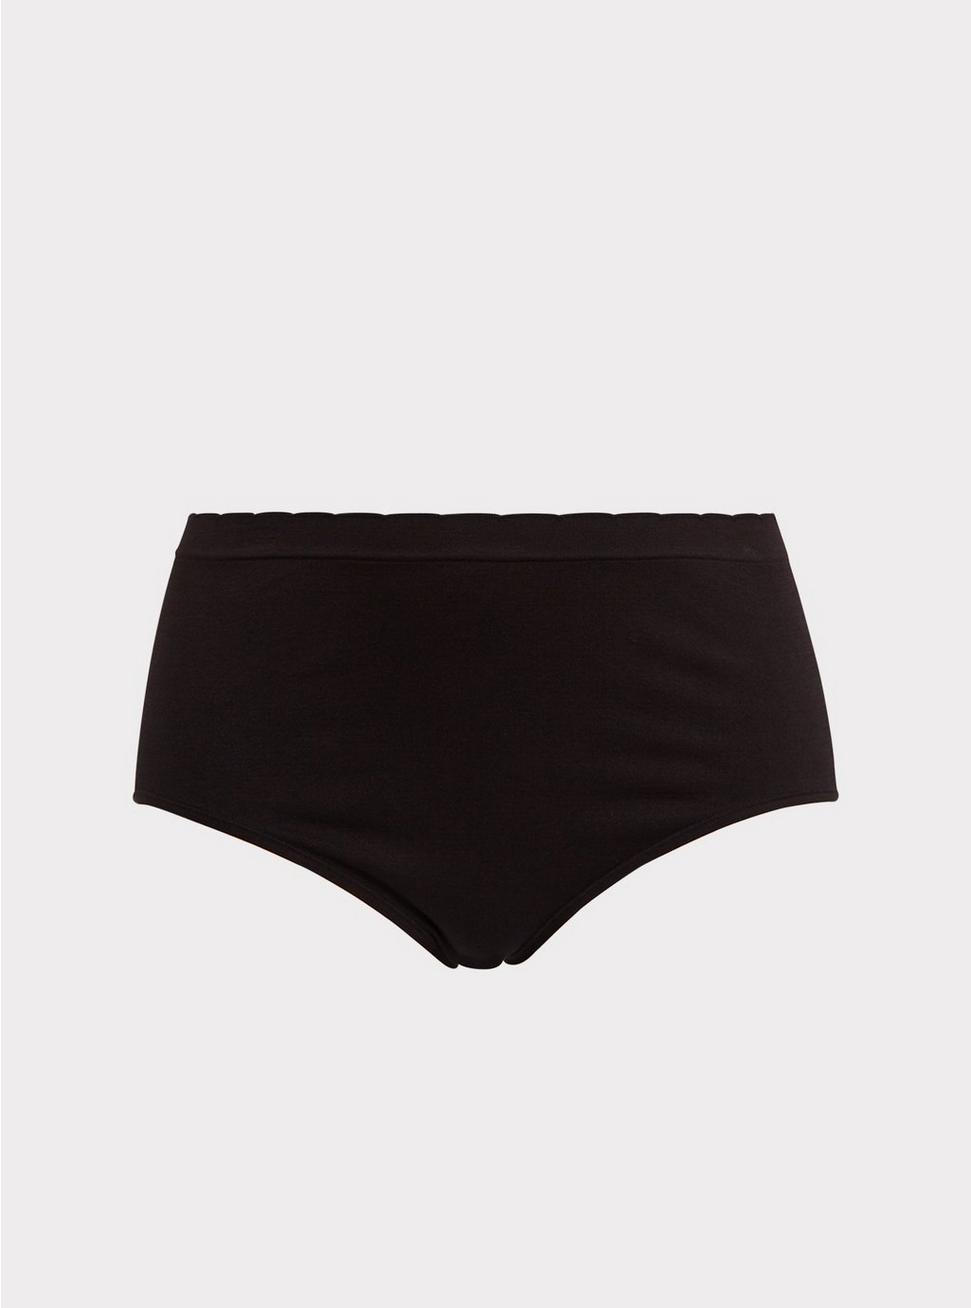 Plus Size Seamless Smooth Mid-Rise Brief Panty, RICH BLACK, hi-res